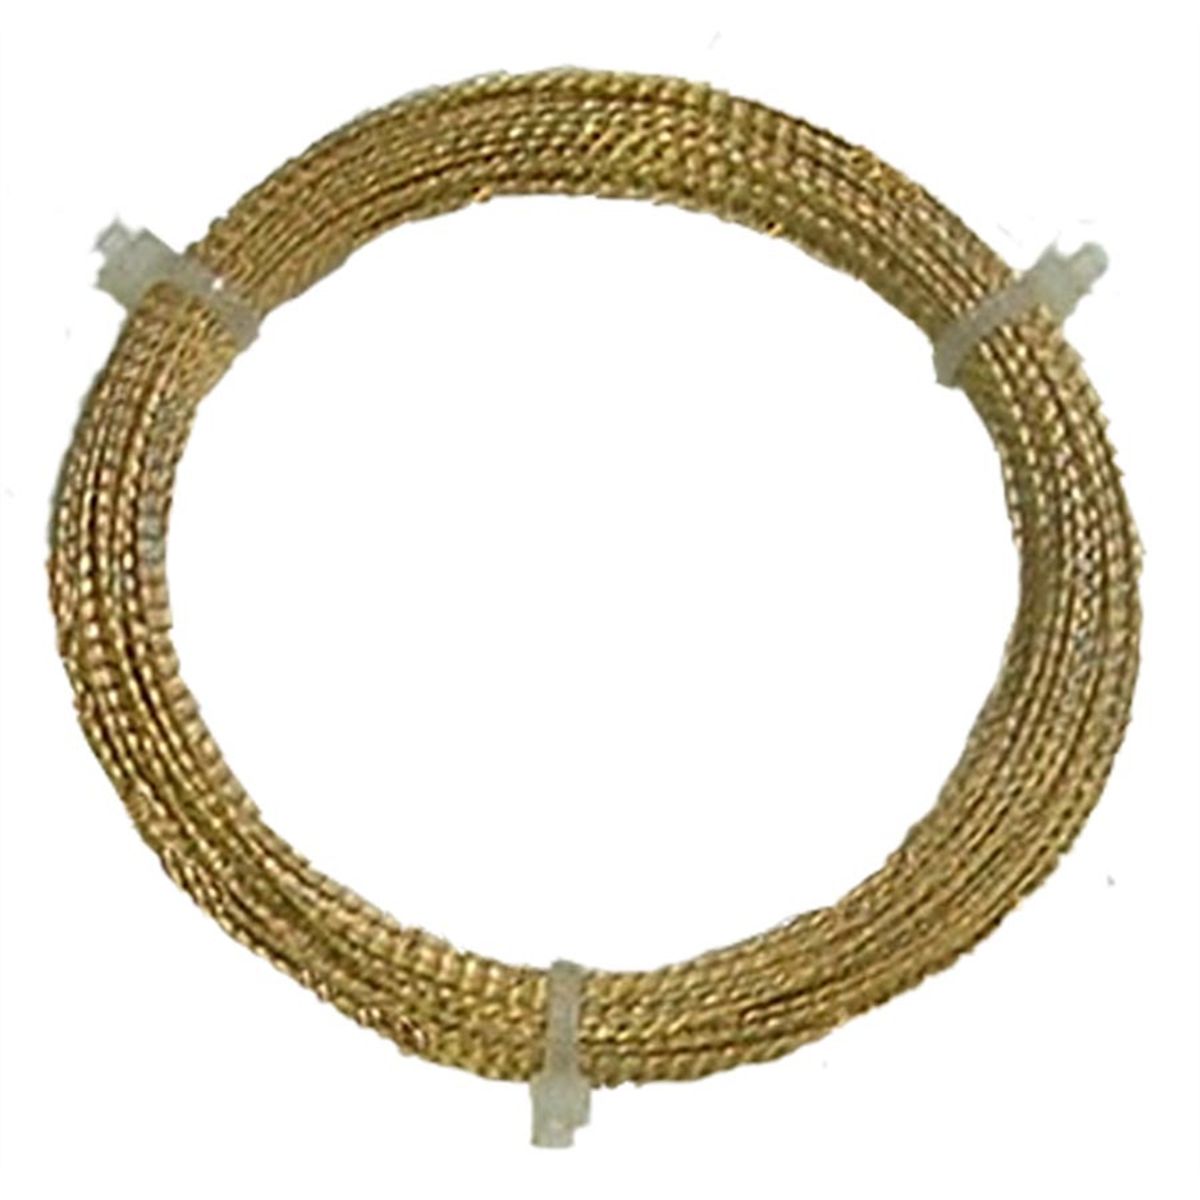 Braided, Golden Stainless Steel Windshield Cut-Out...